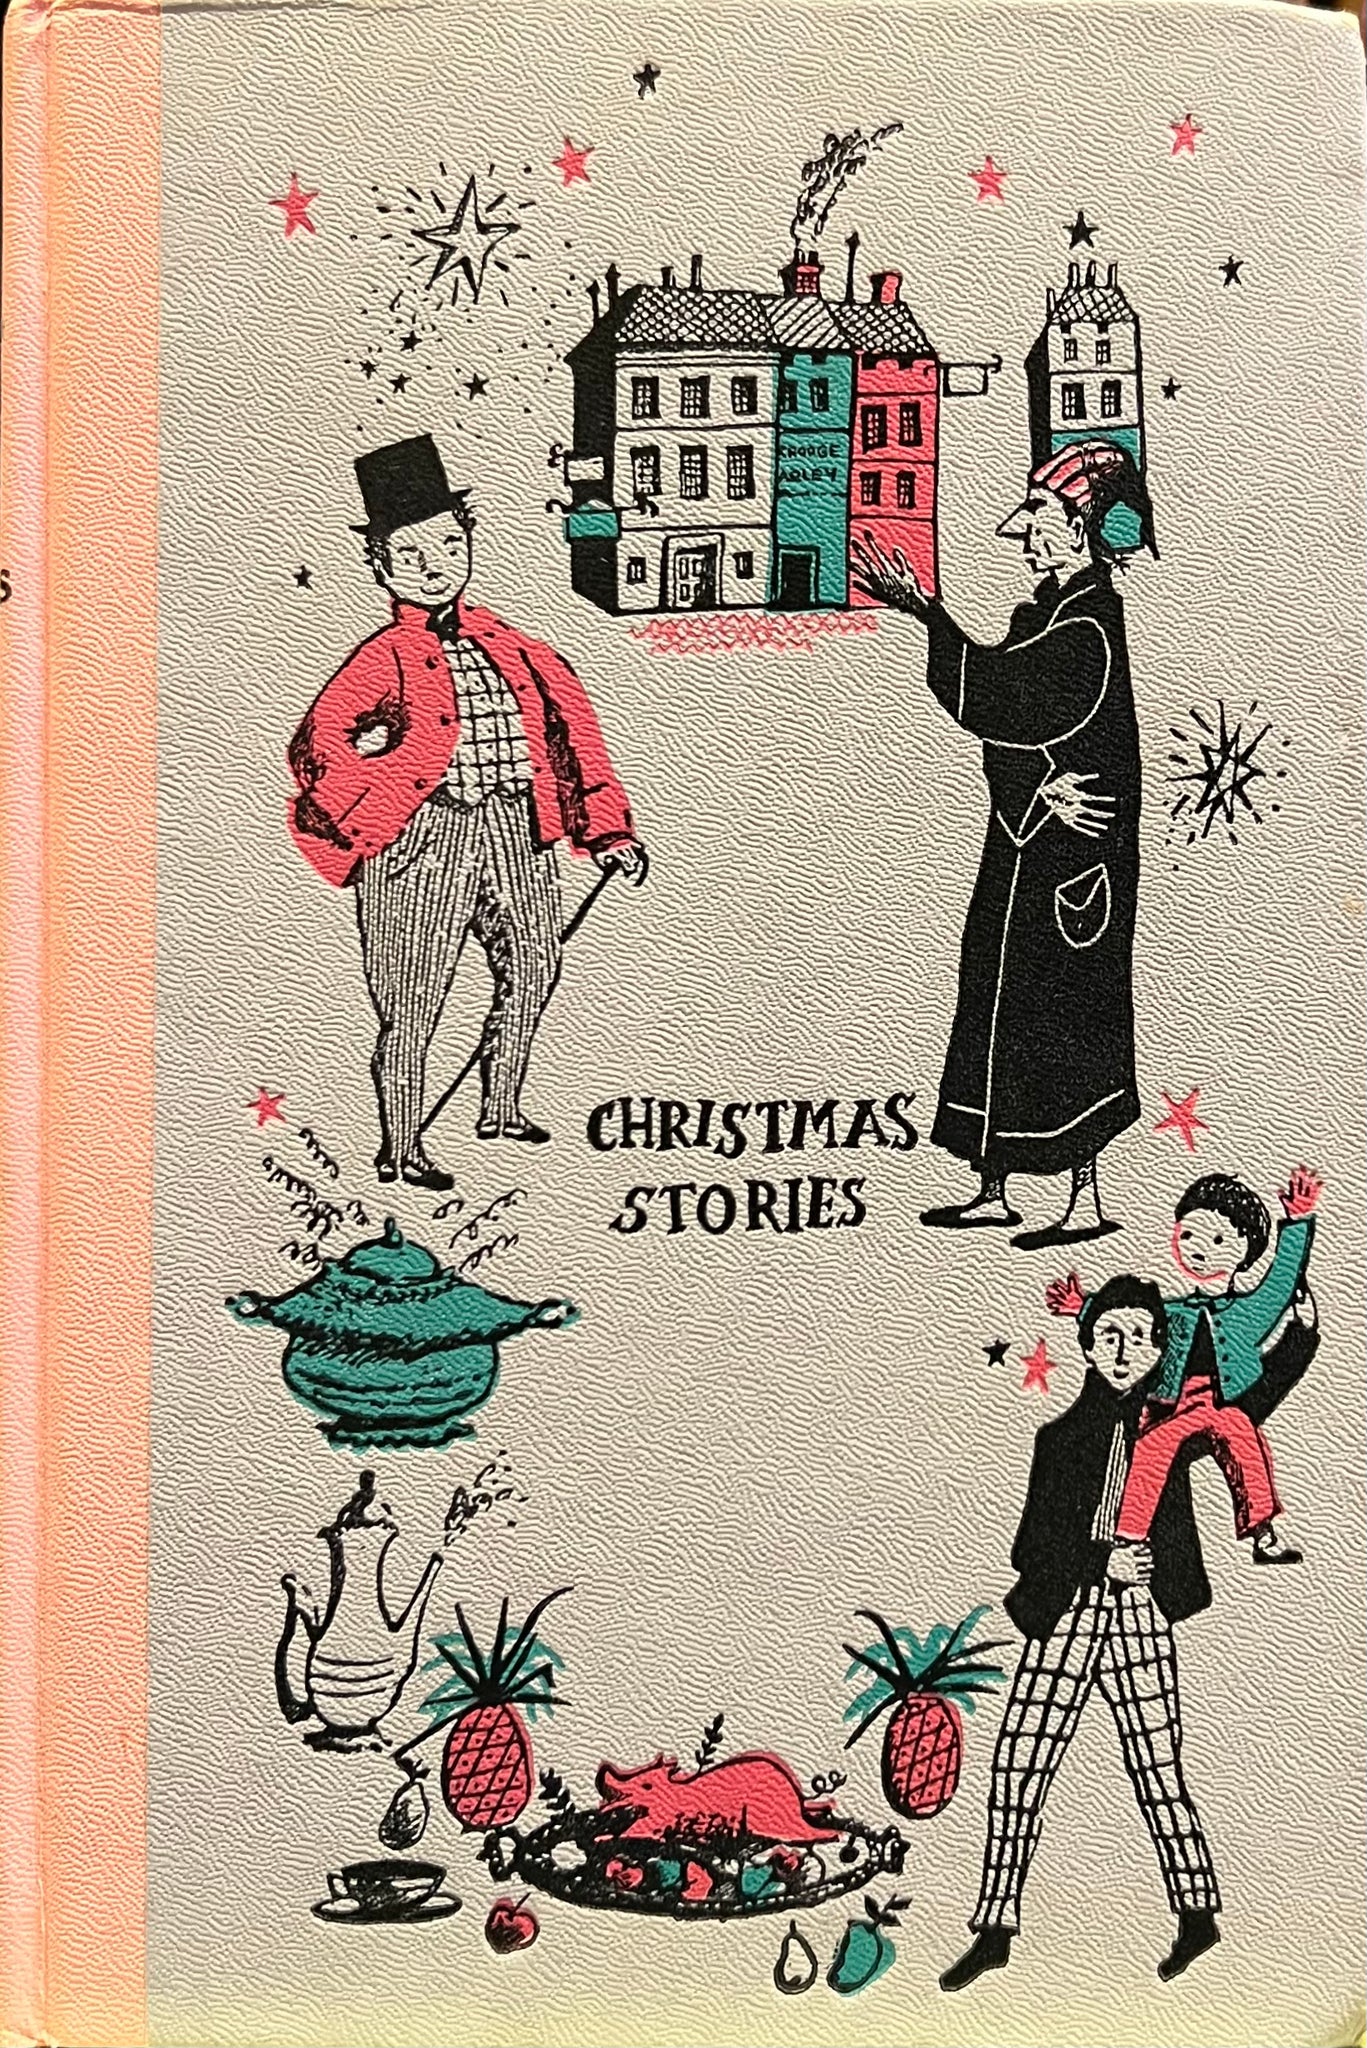 Christmas Stories (A Christmas Carol, The Chimes and Cricket on the Heart by Charles Dickens)